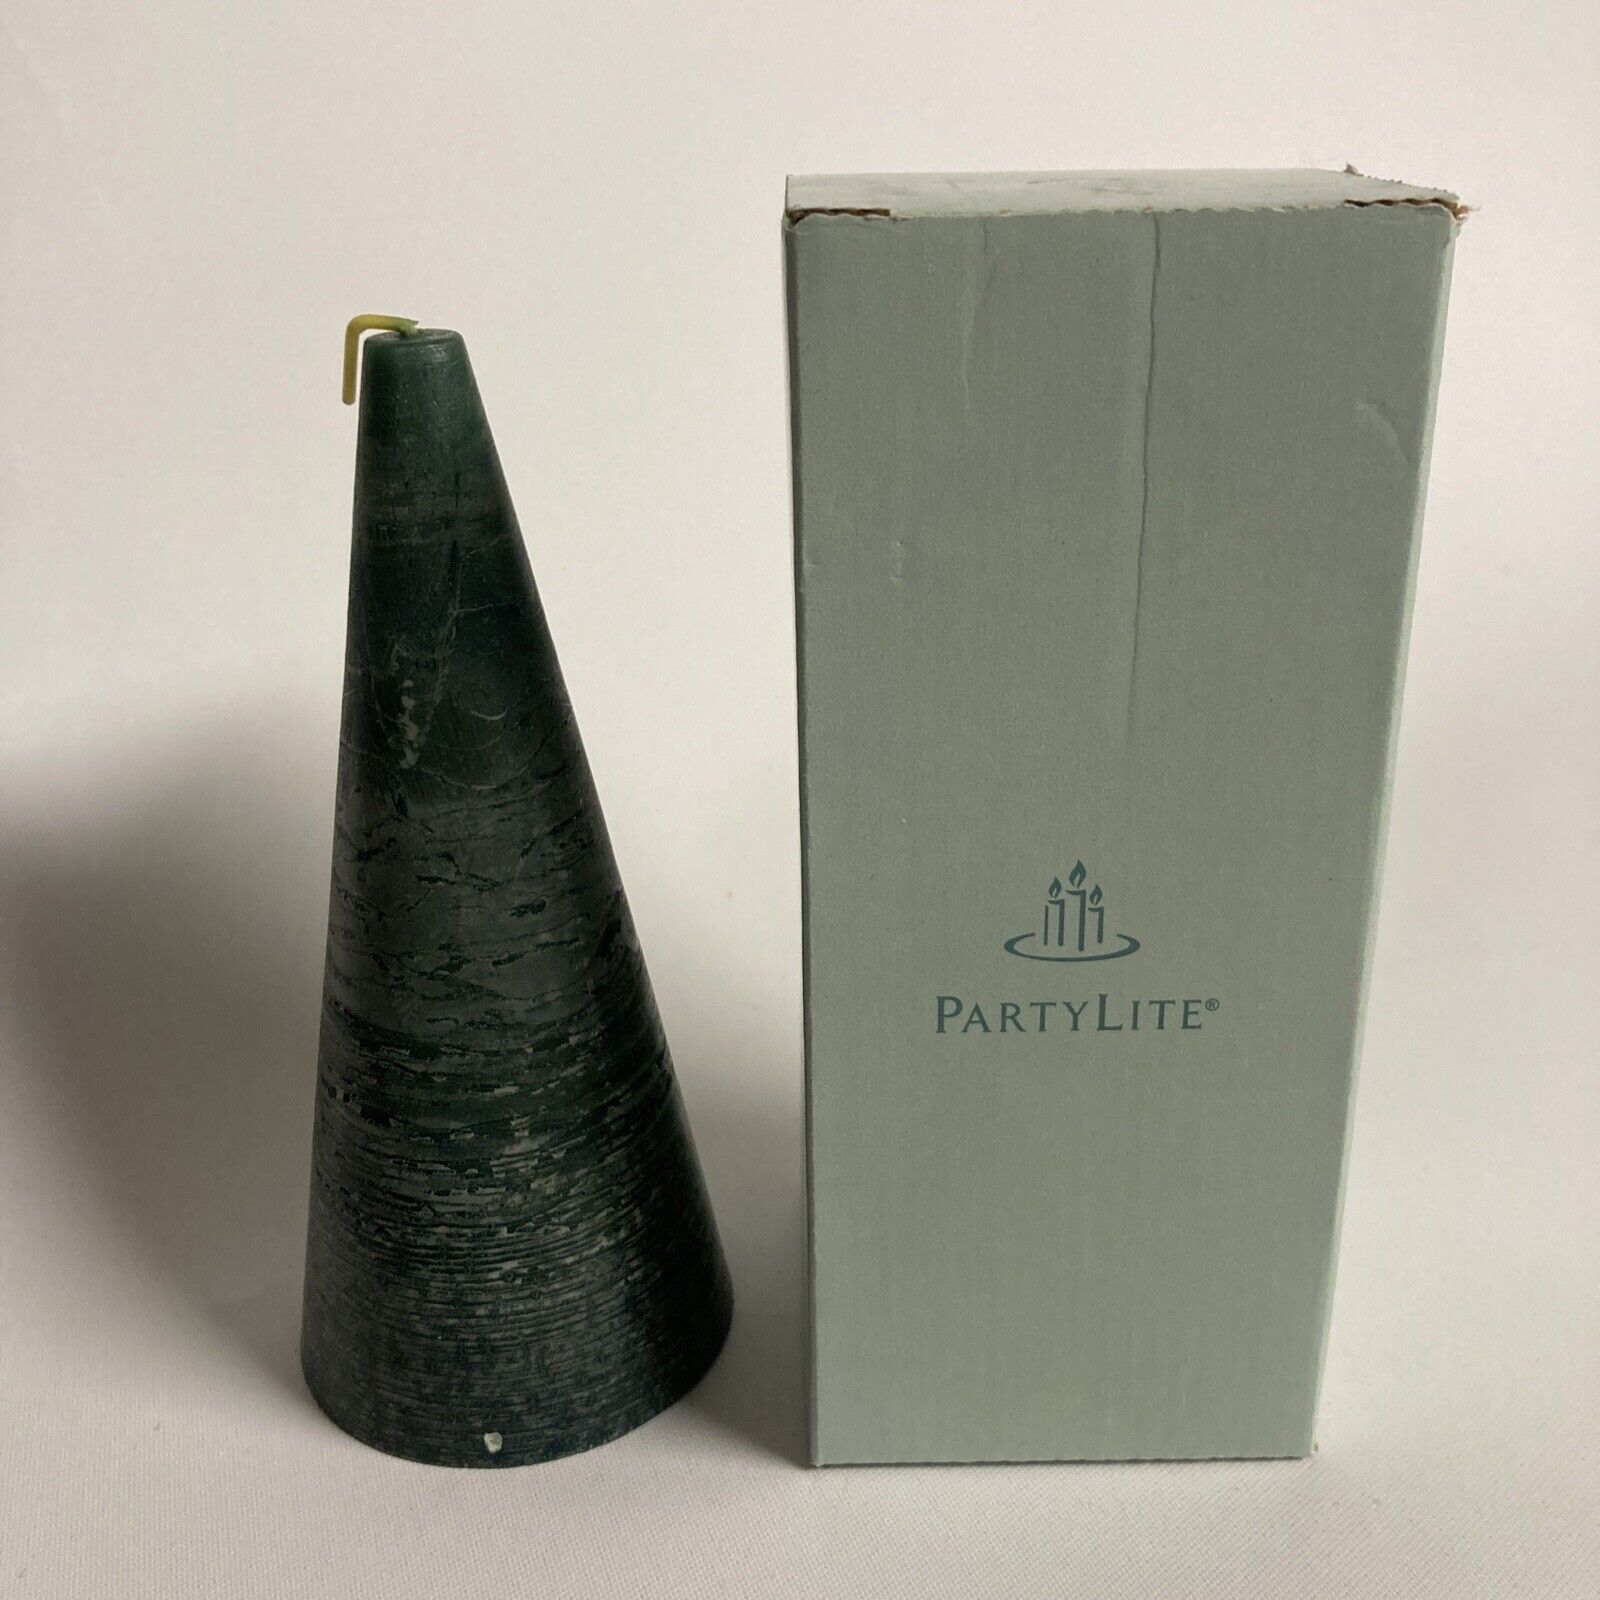 PartyLite 3” x 7” Cone Candle Pineberry CP7591 New Old Stock w/ Box